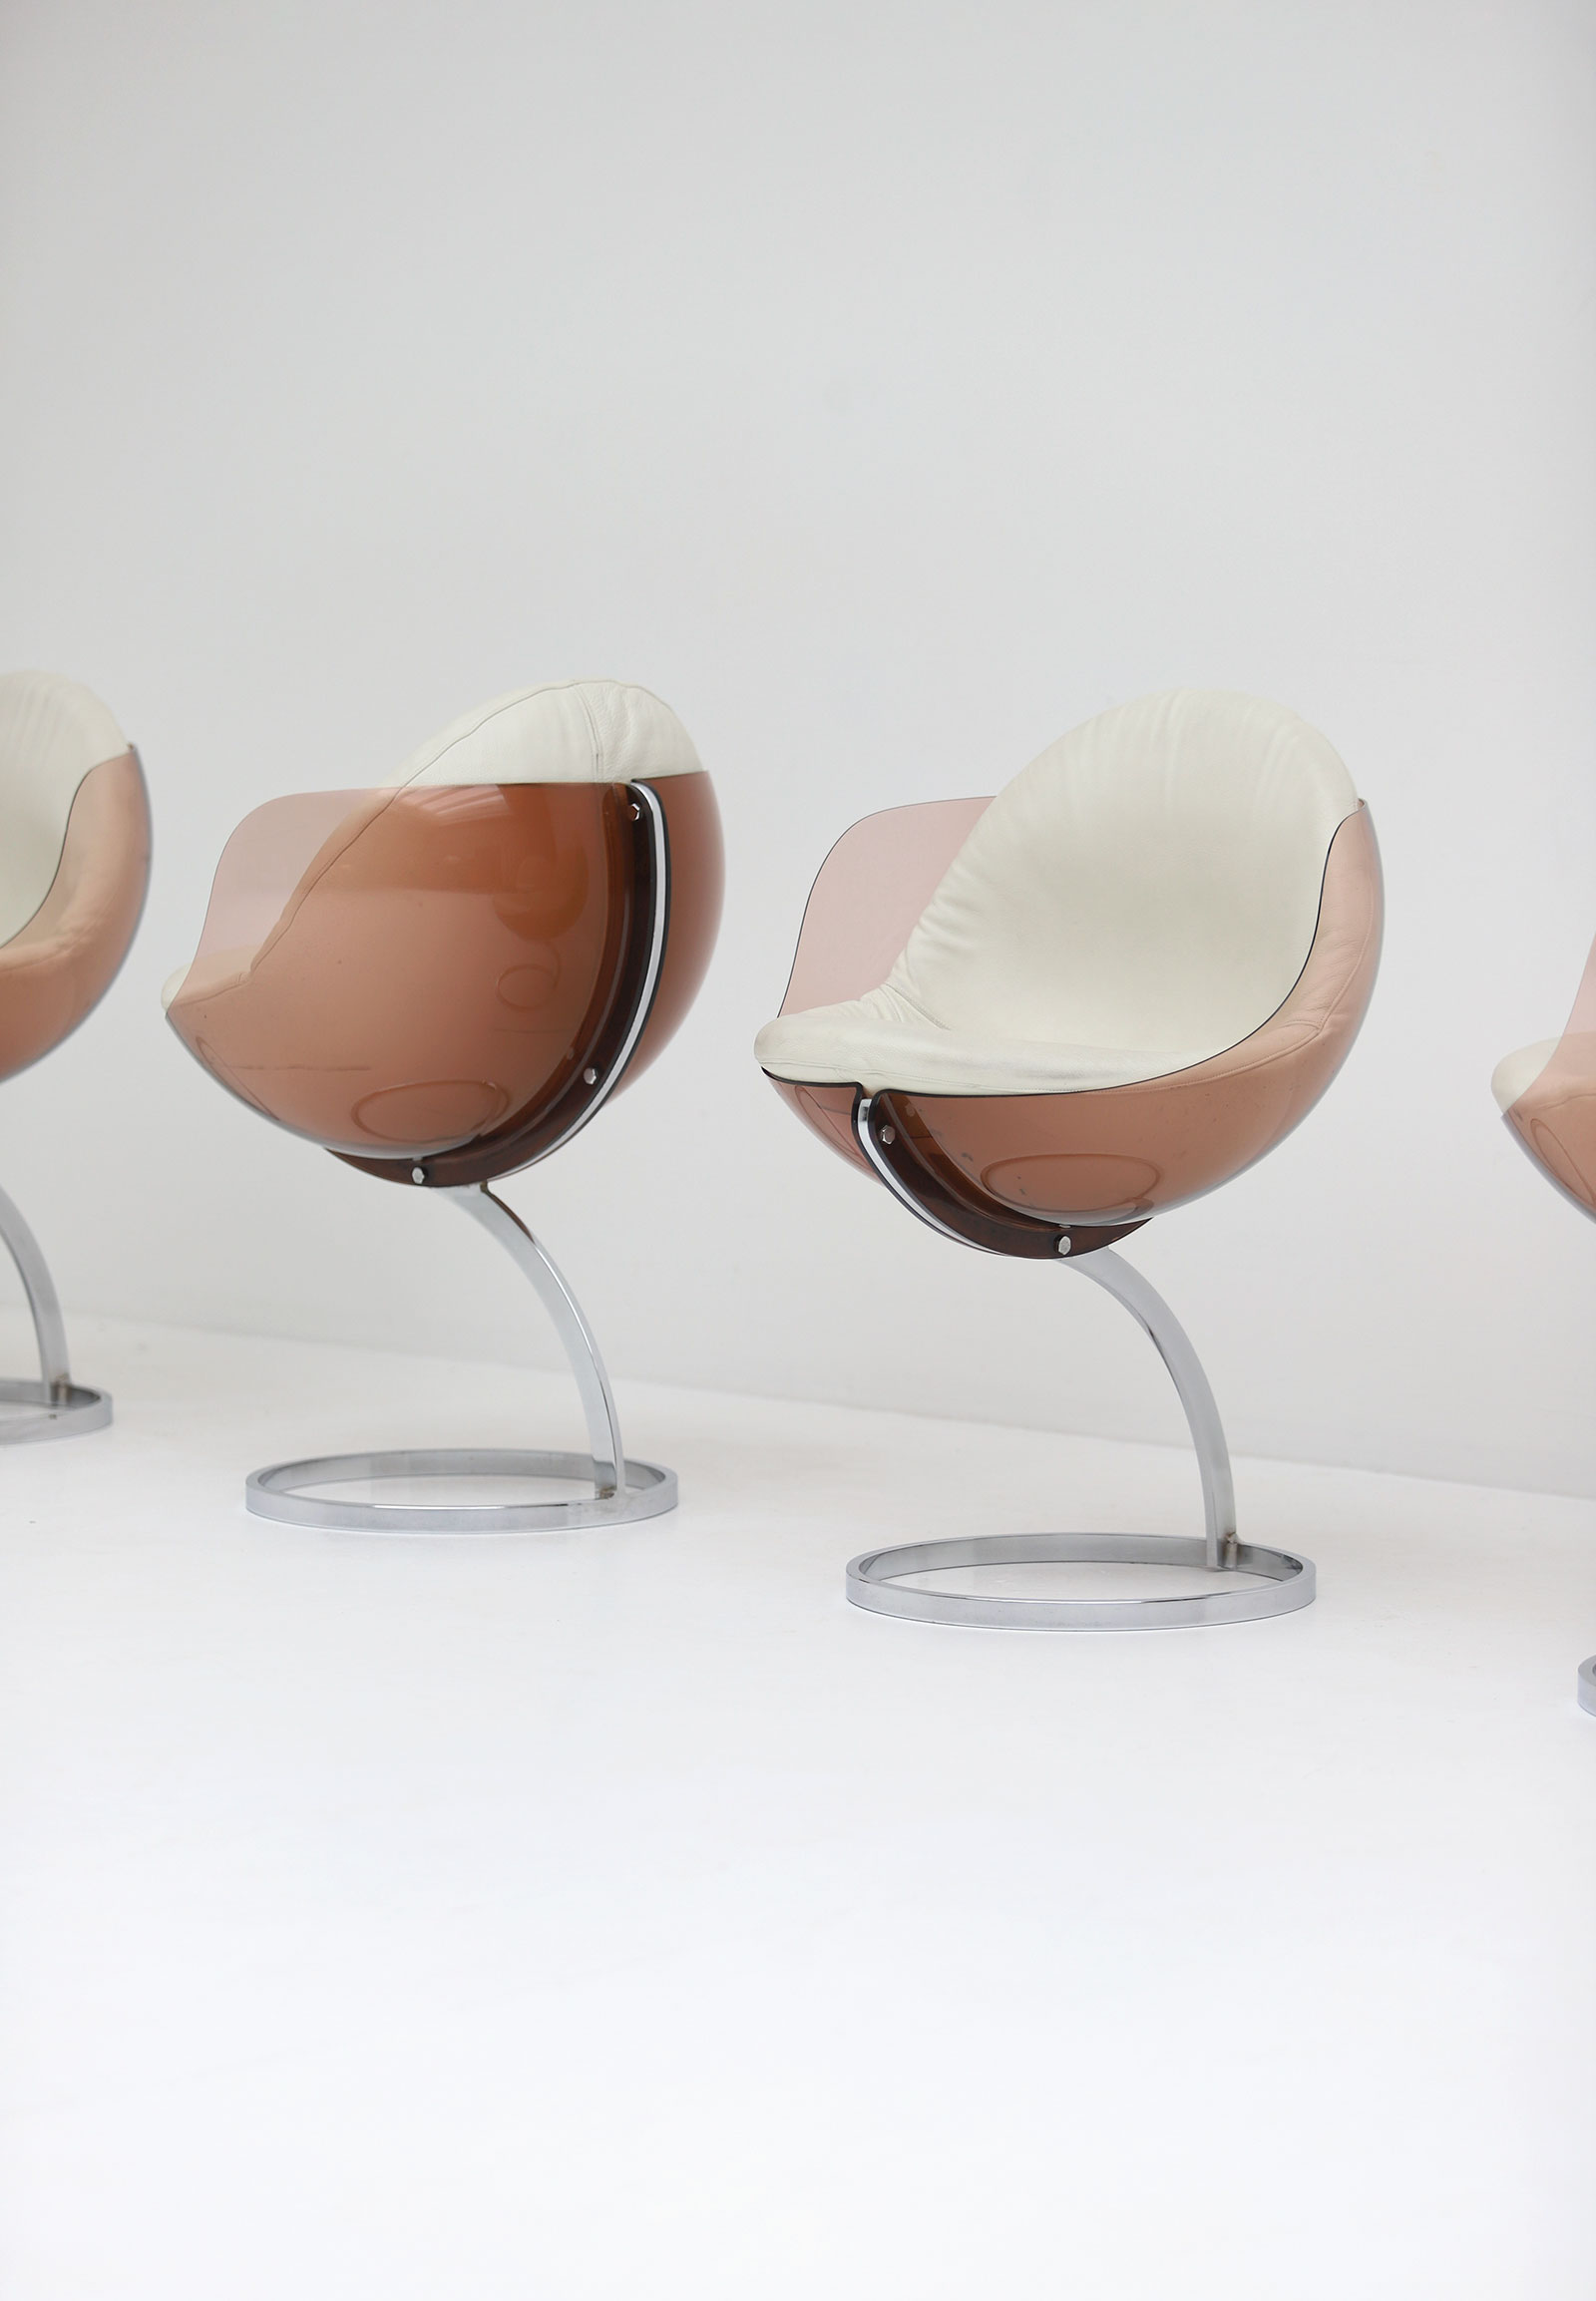 Sphere chair designed by Boris Tabacoffimage 4